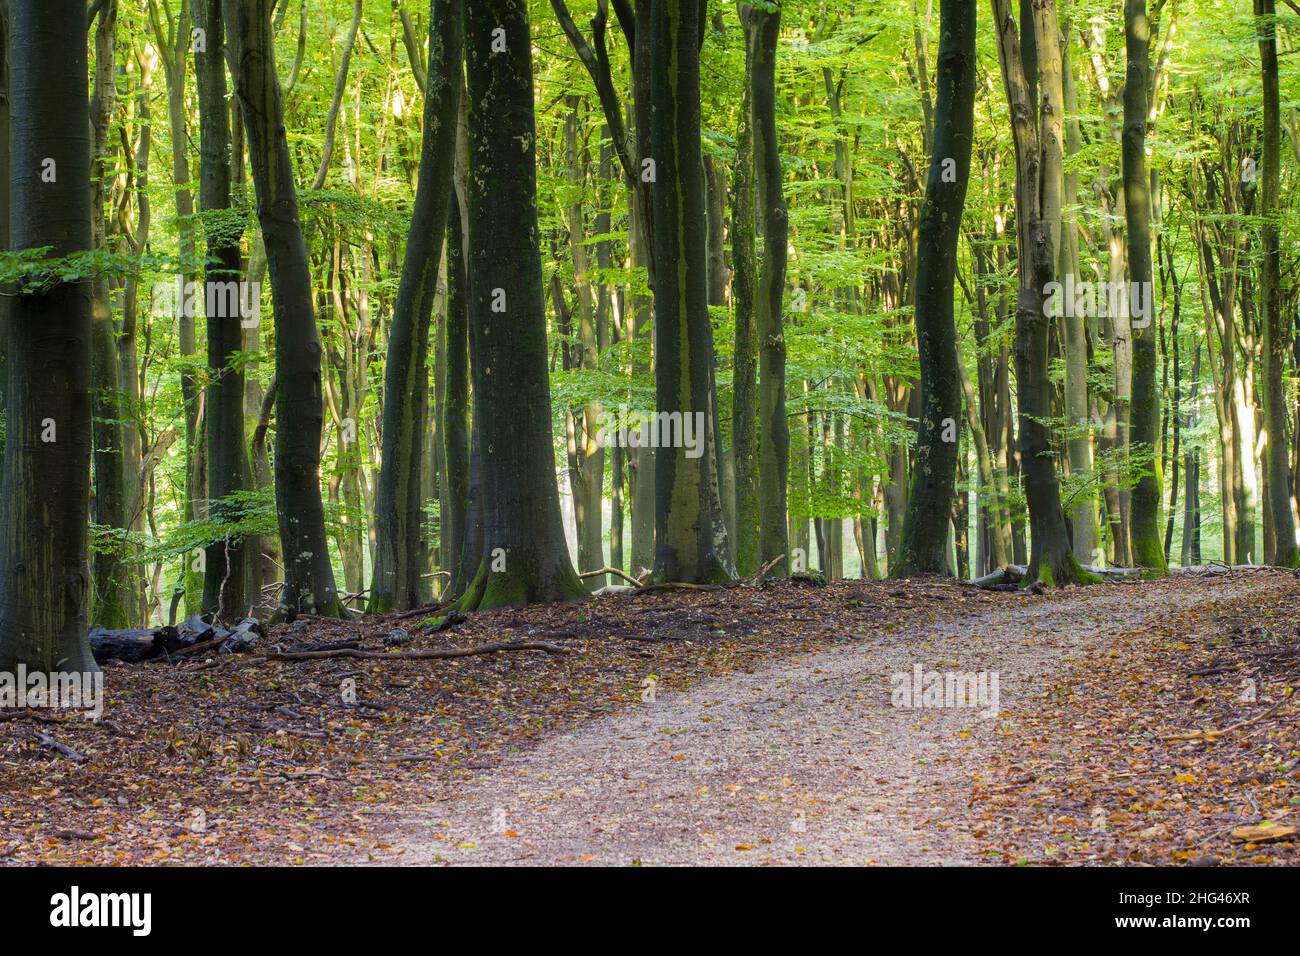 Beech trees in a forest, sunlight shining through foliage and lighting up the leaves. Stock Photo